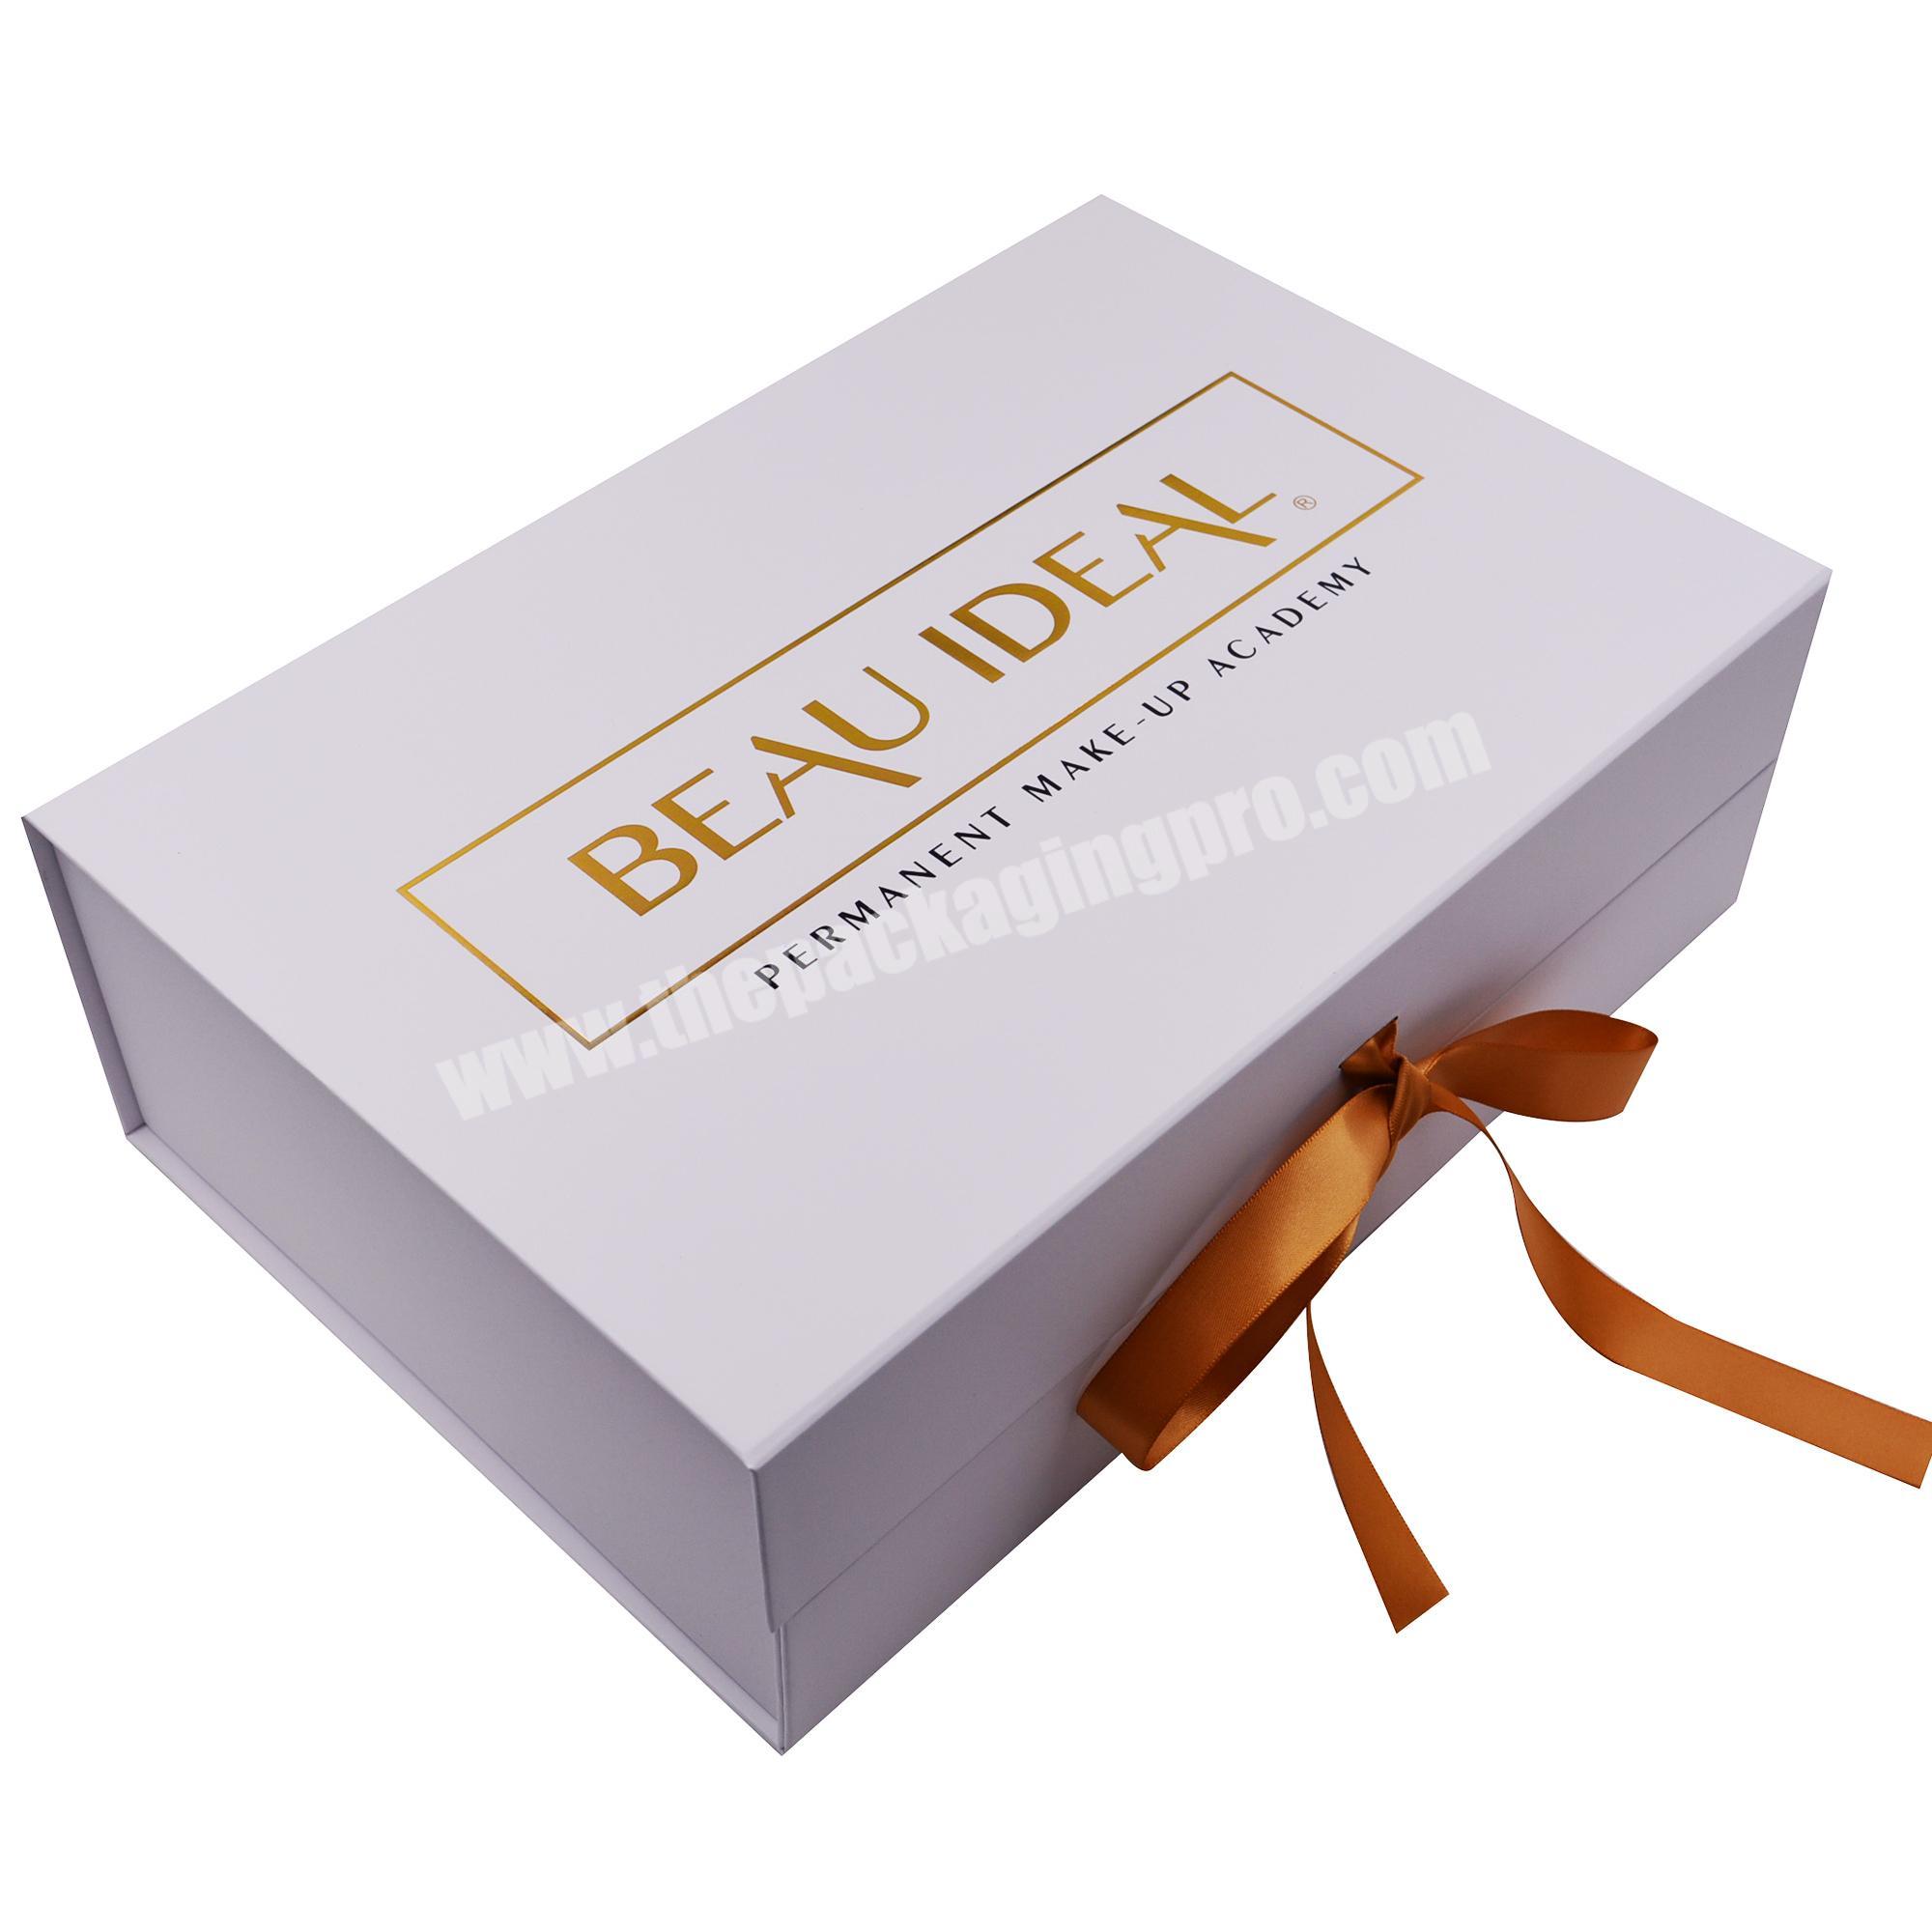 Luxury Clothing Foldable Cardboard Gift Box with Ribbon Closure Skincare Magnetic Gift Box White Packaging for Handbag Hair